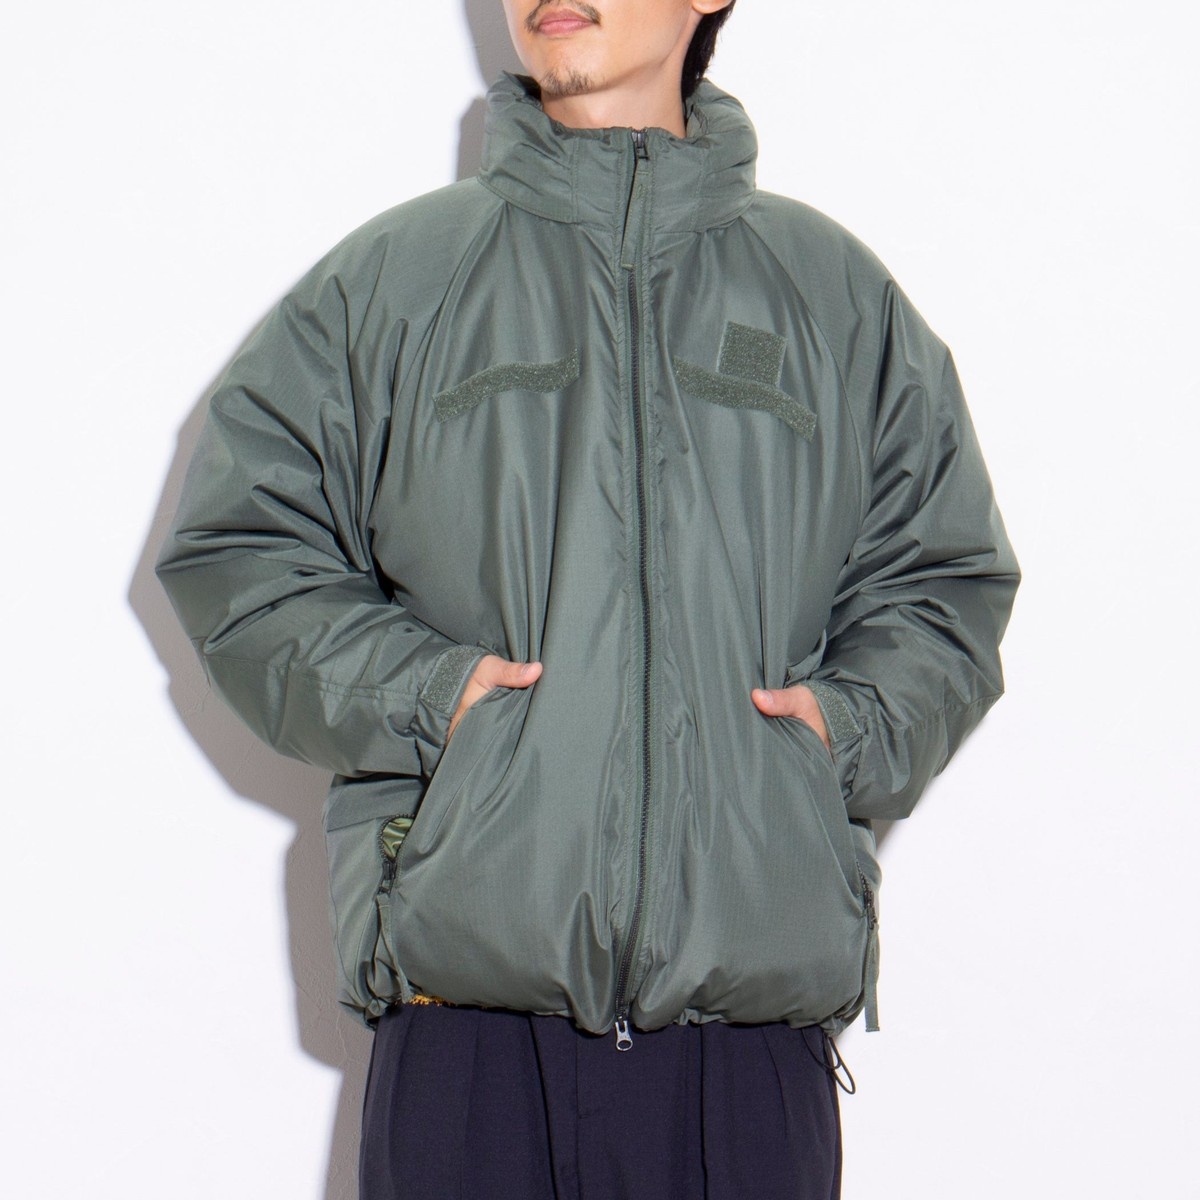 TAION/タイオン】GLOSTER別注 MILITALY LEVEL7 JACKET ダウン 